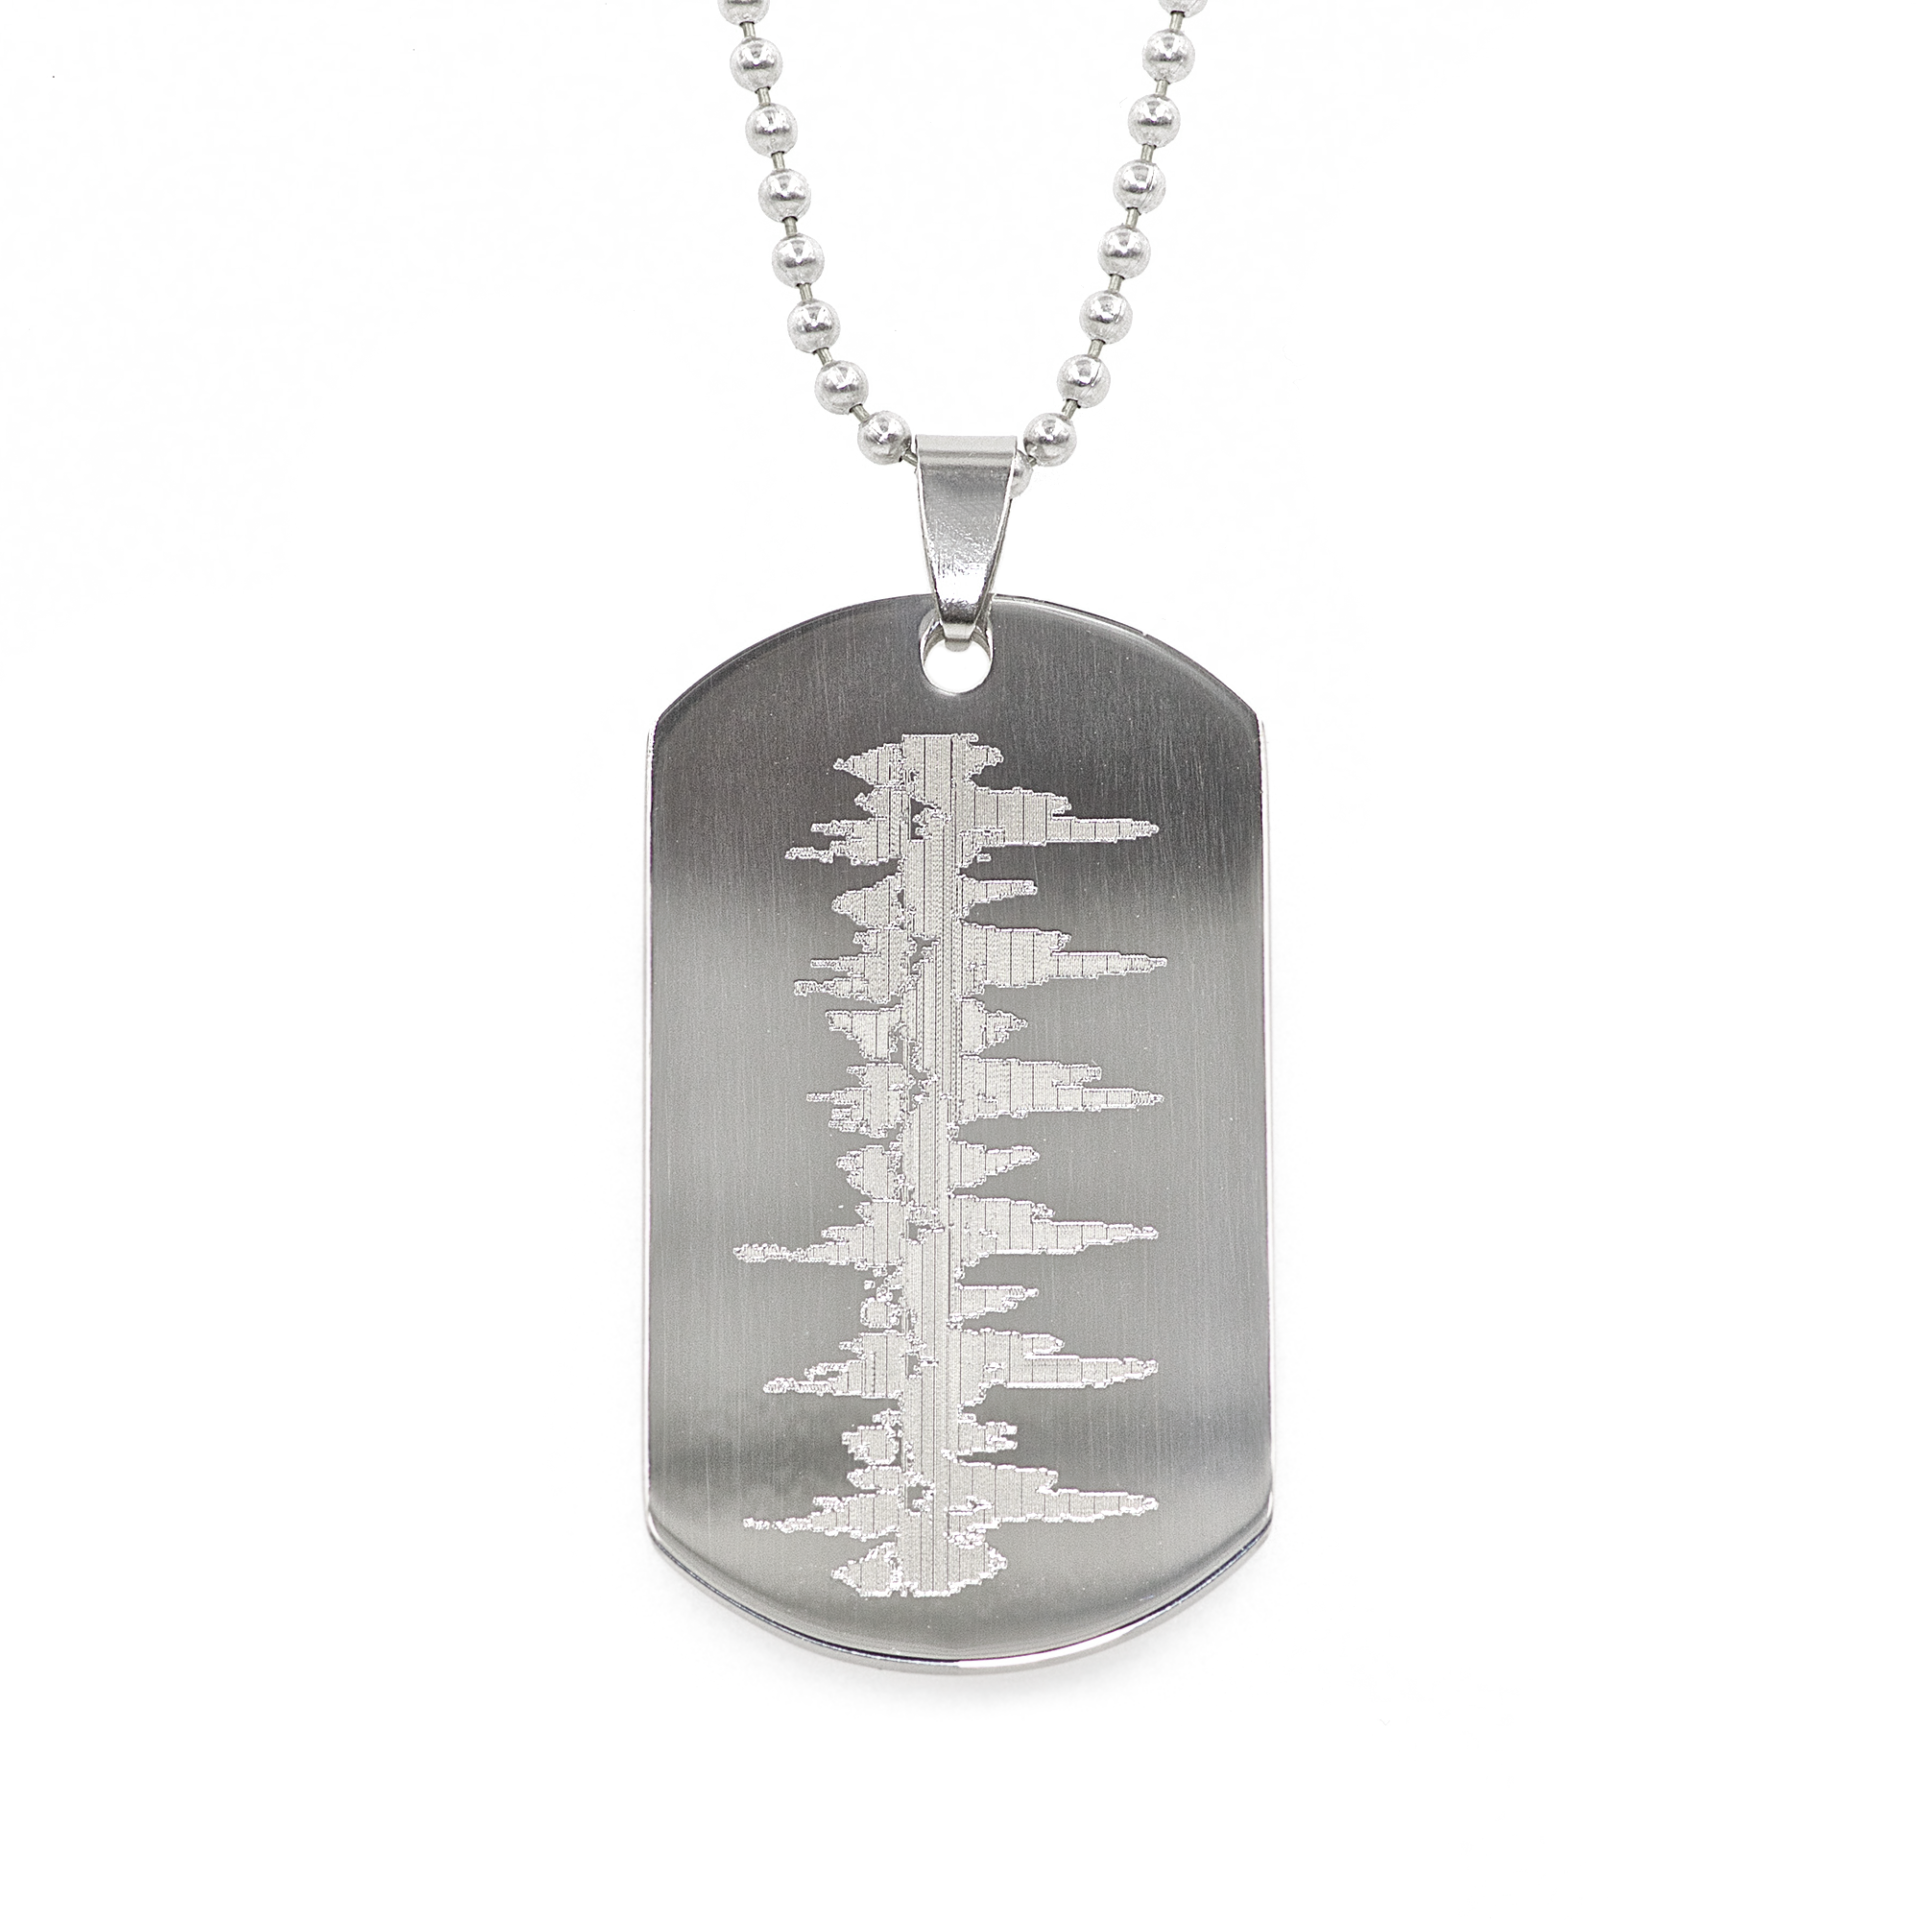 Heartbeat Dog Tag Necklace Using an Ultrasound Heartbeat Waveform in Stainless Steel